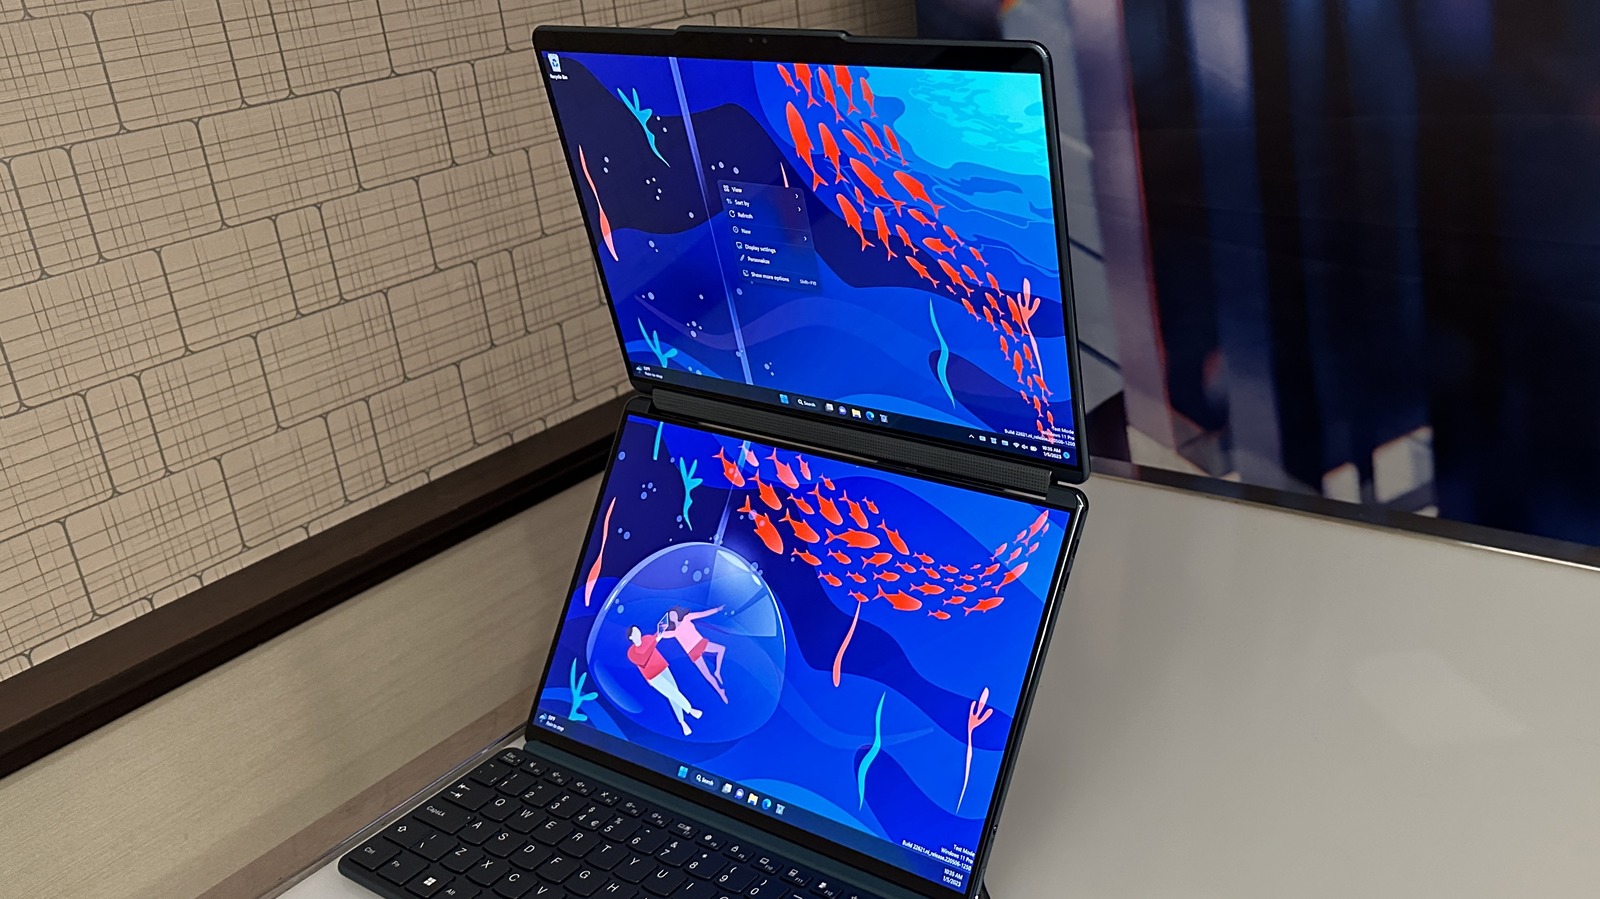 Hands-On With Lenovo’s Most Unique CES 2023 Laptops And Tablets – SlashGear